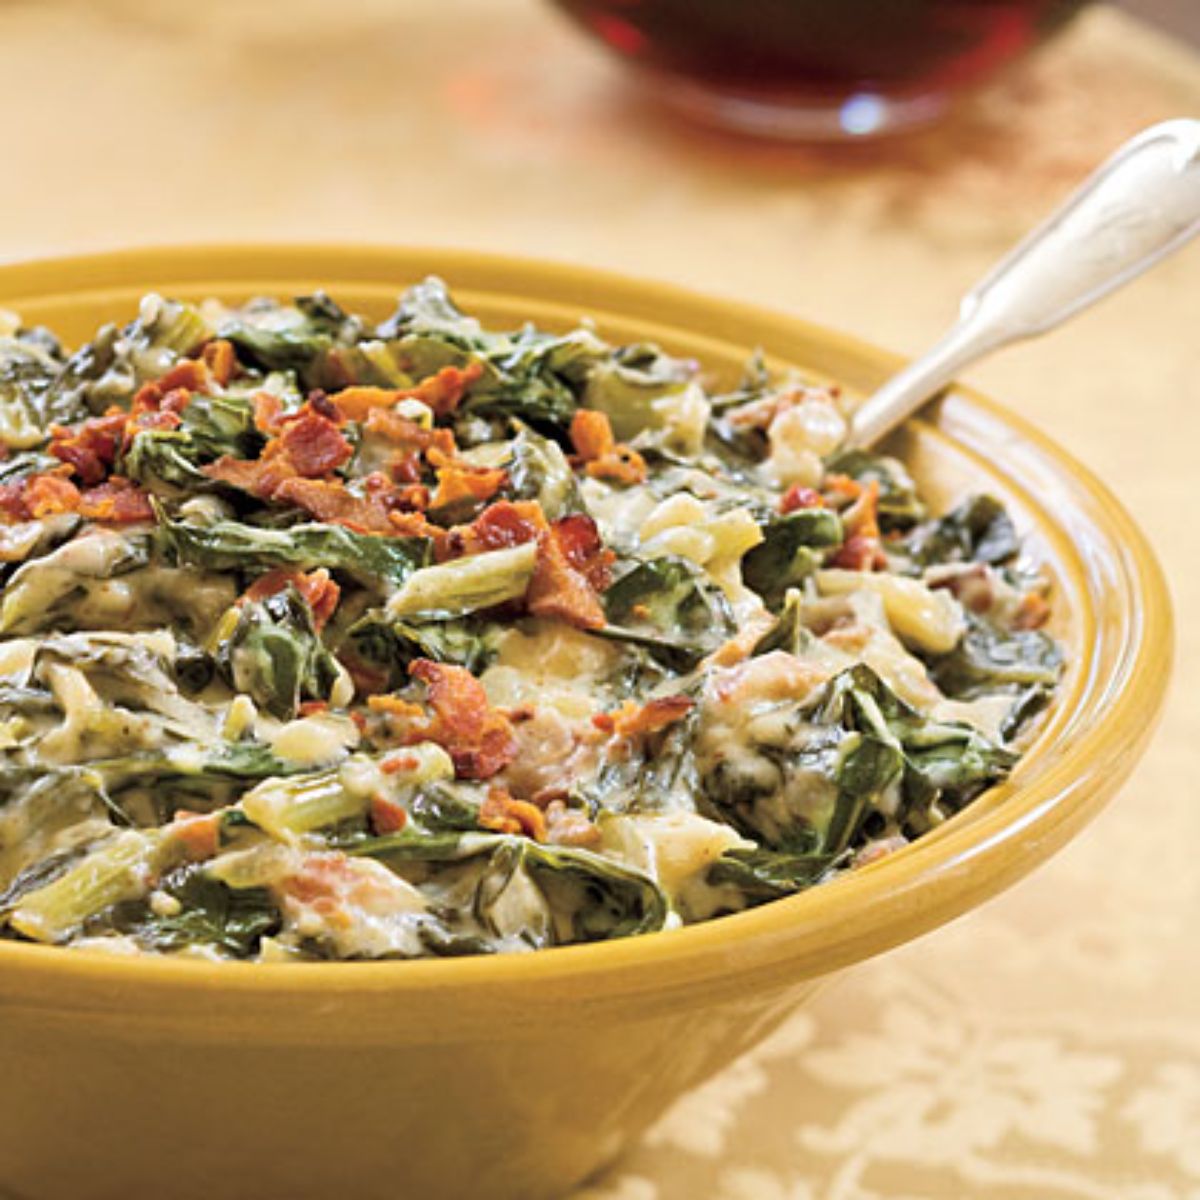 Healthy creamed collard greens in a yellow bowl.